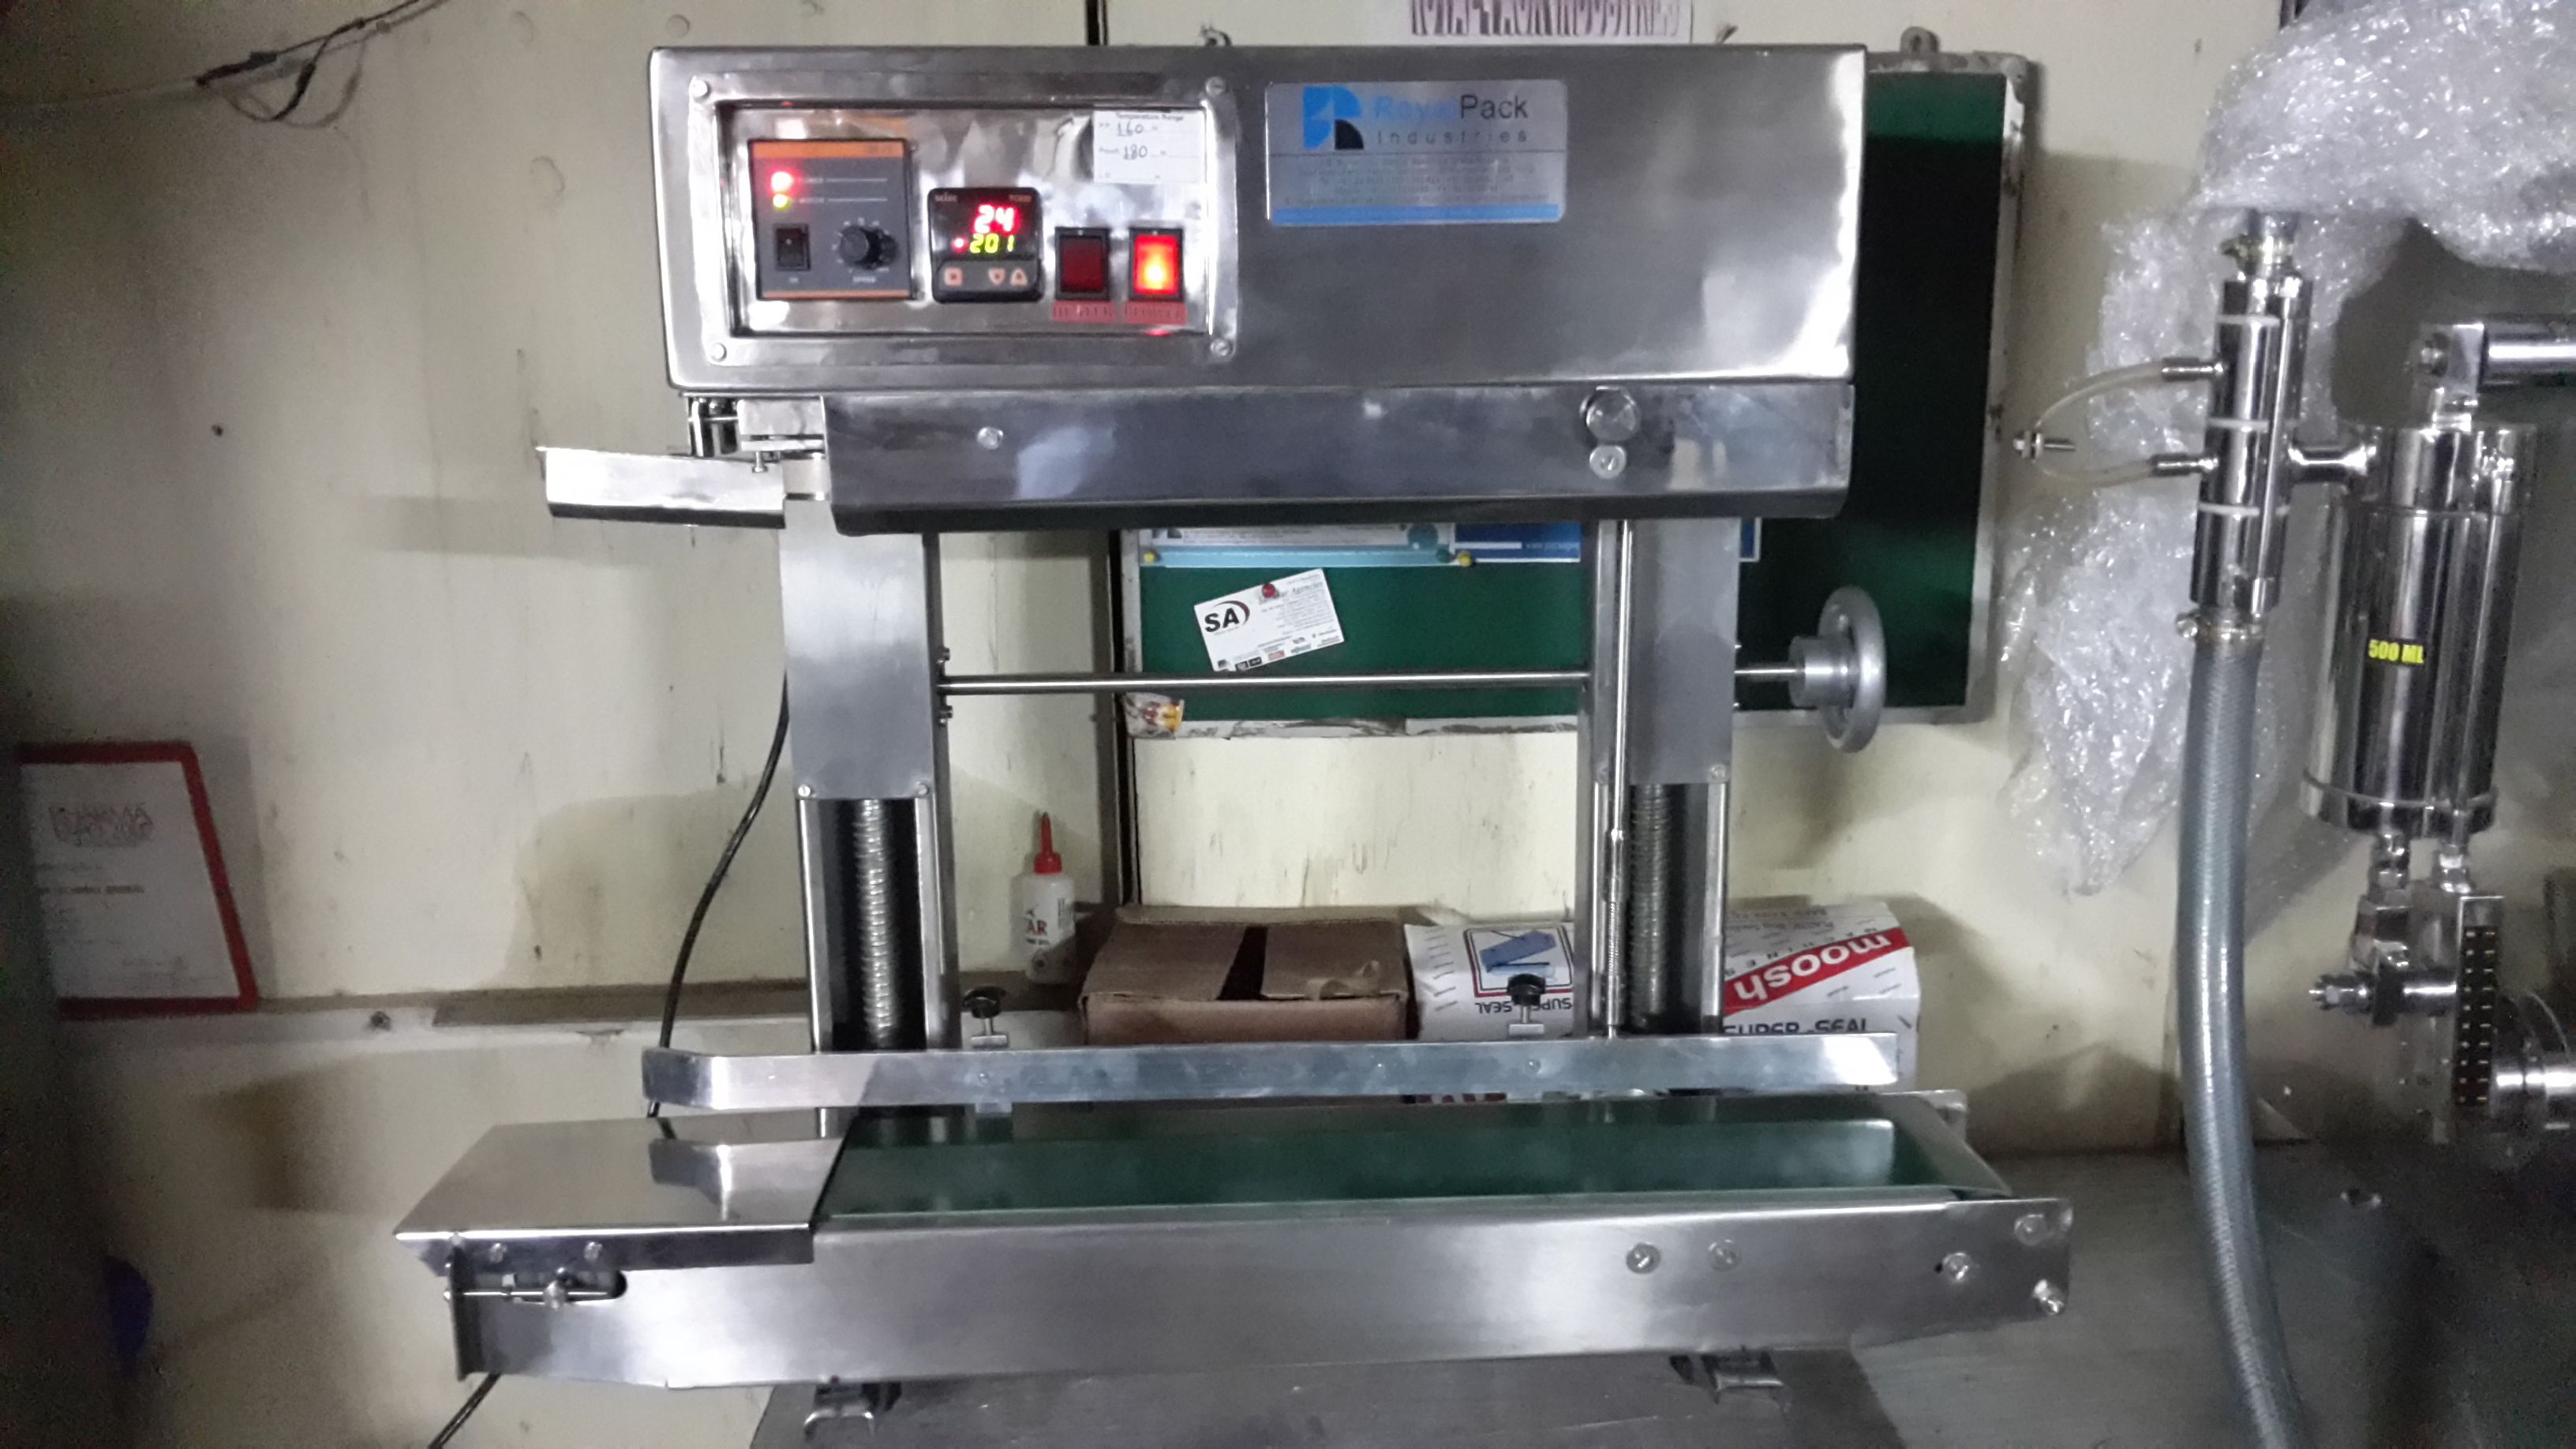 Continuous Pouch Sealing Machine